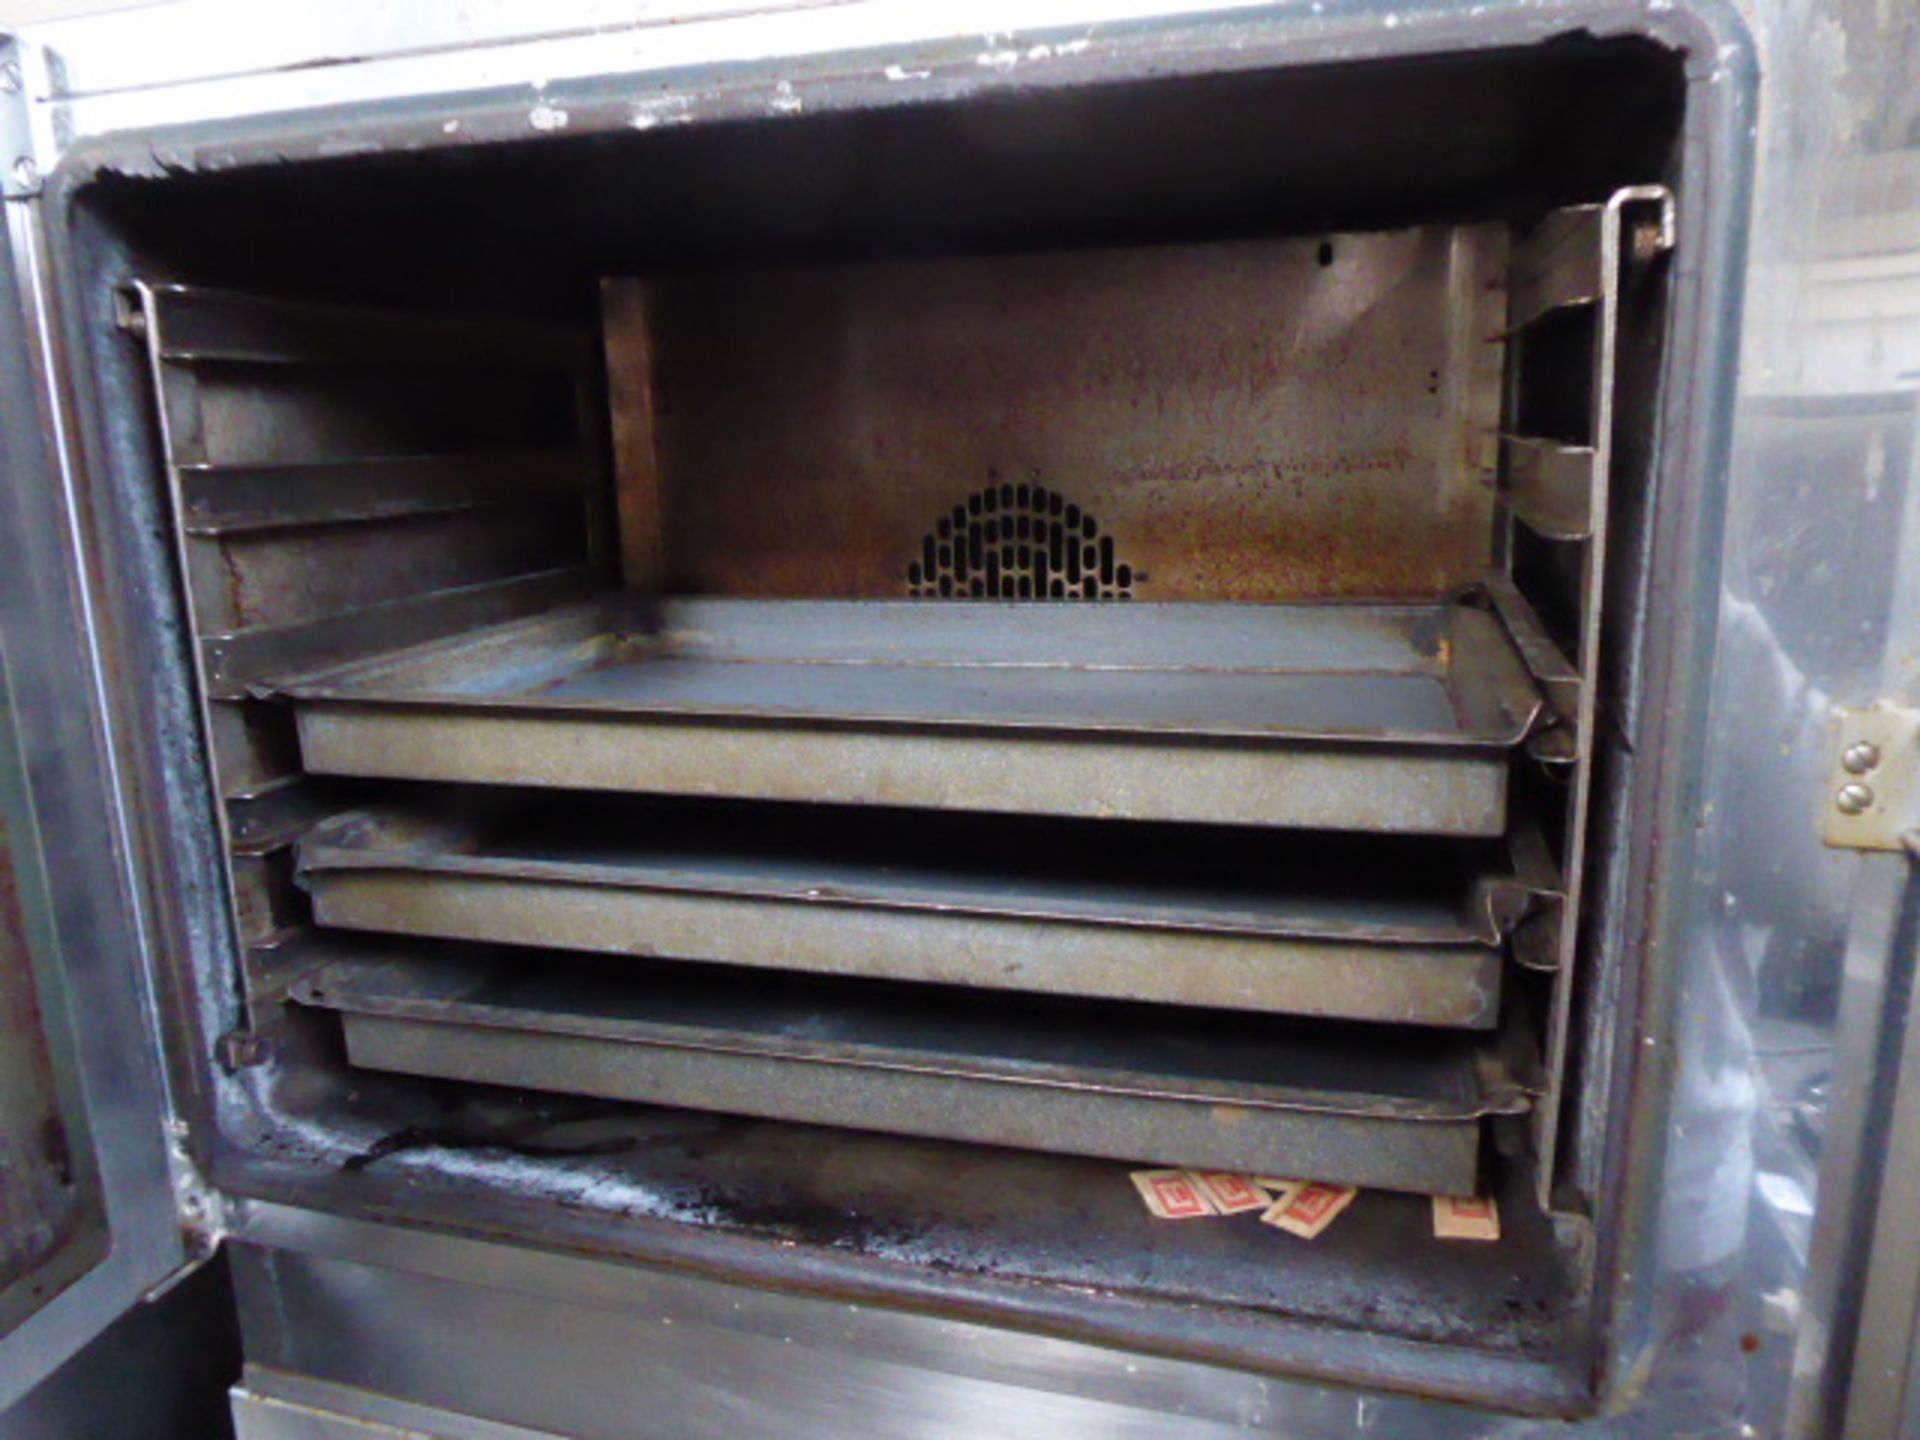 85cm Lainox double stack oven on trolley - Image 2 of 3